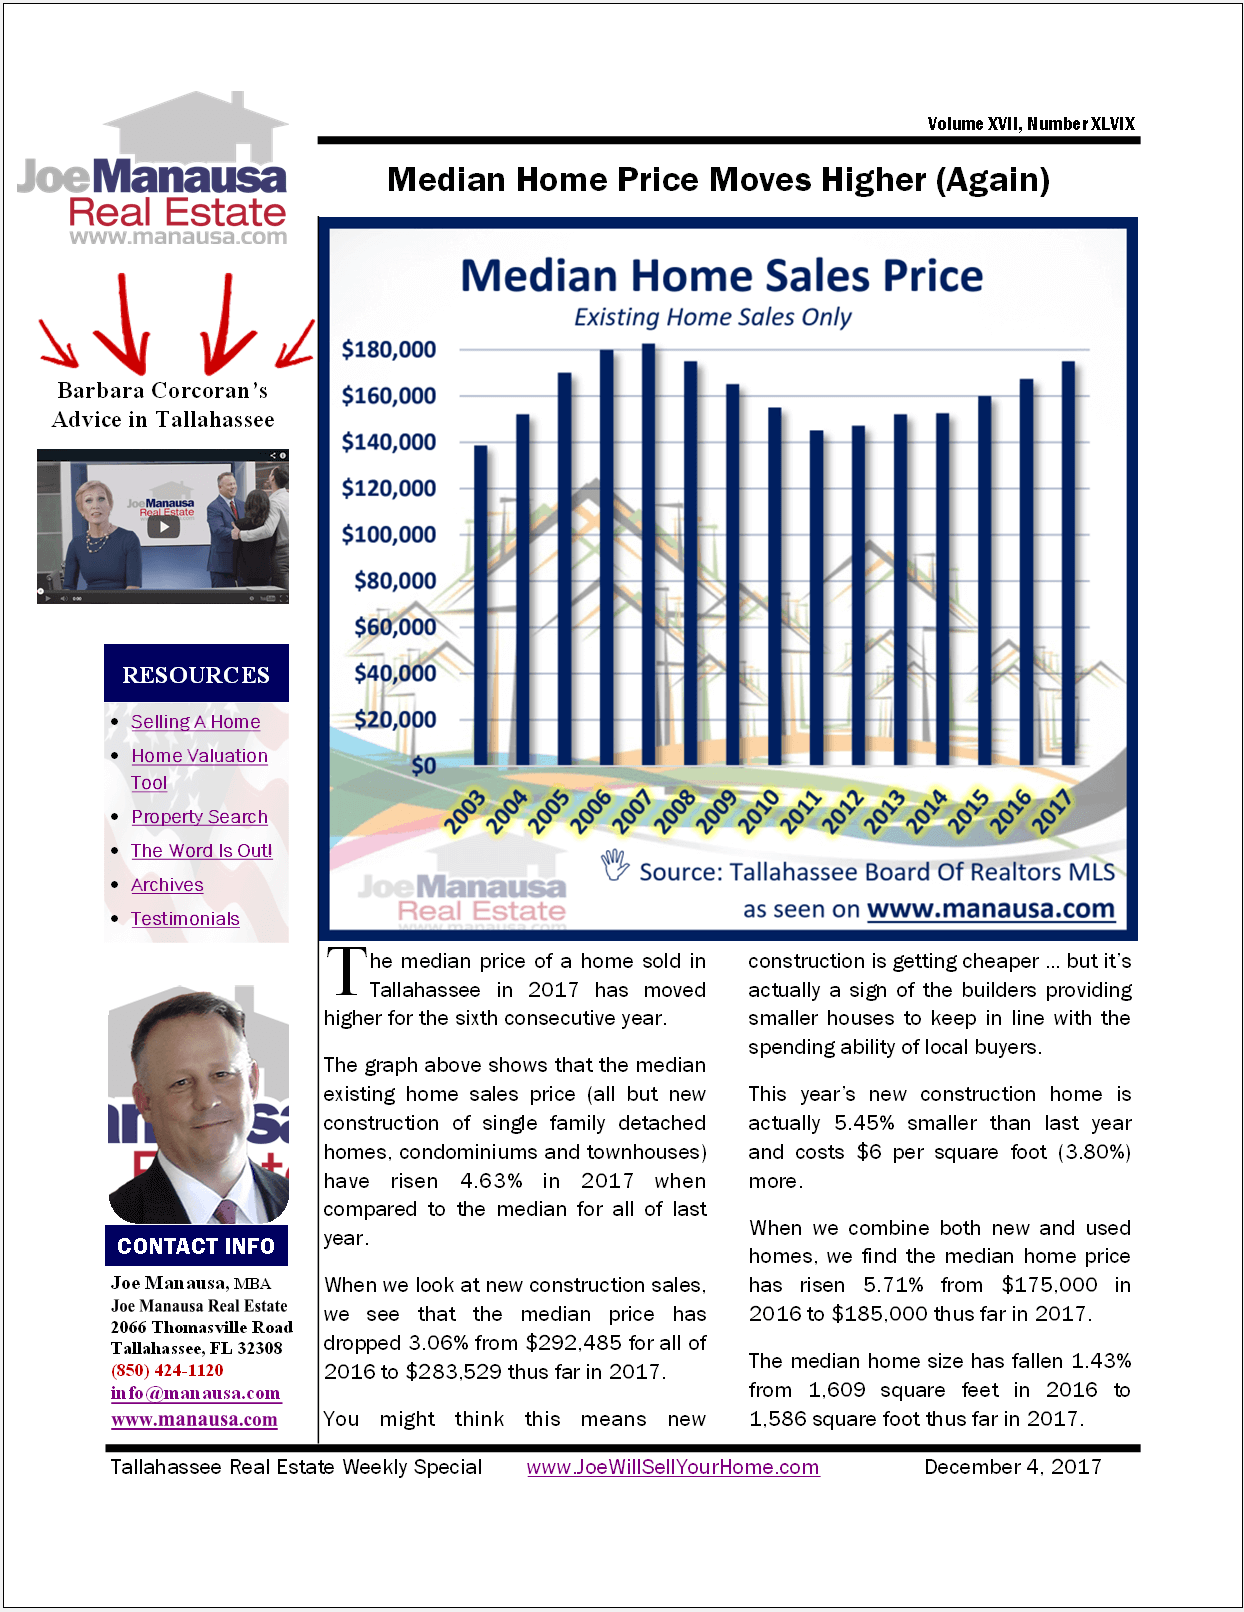 Median Home Price Moves Higher (Again)